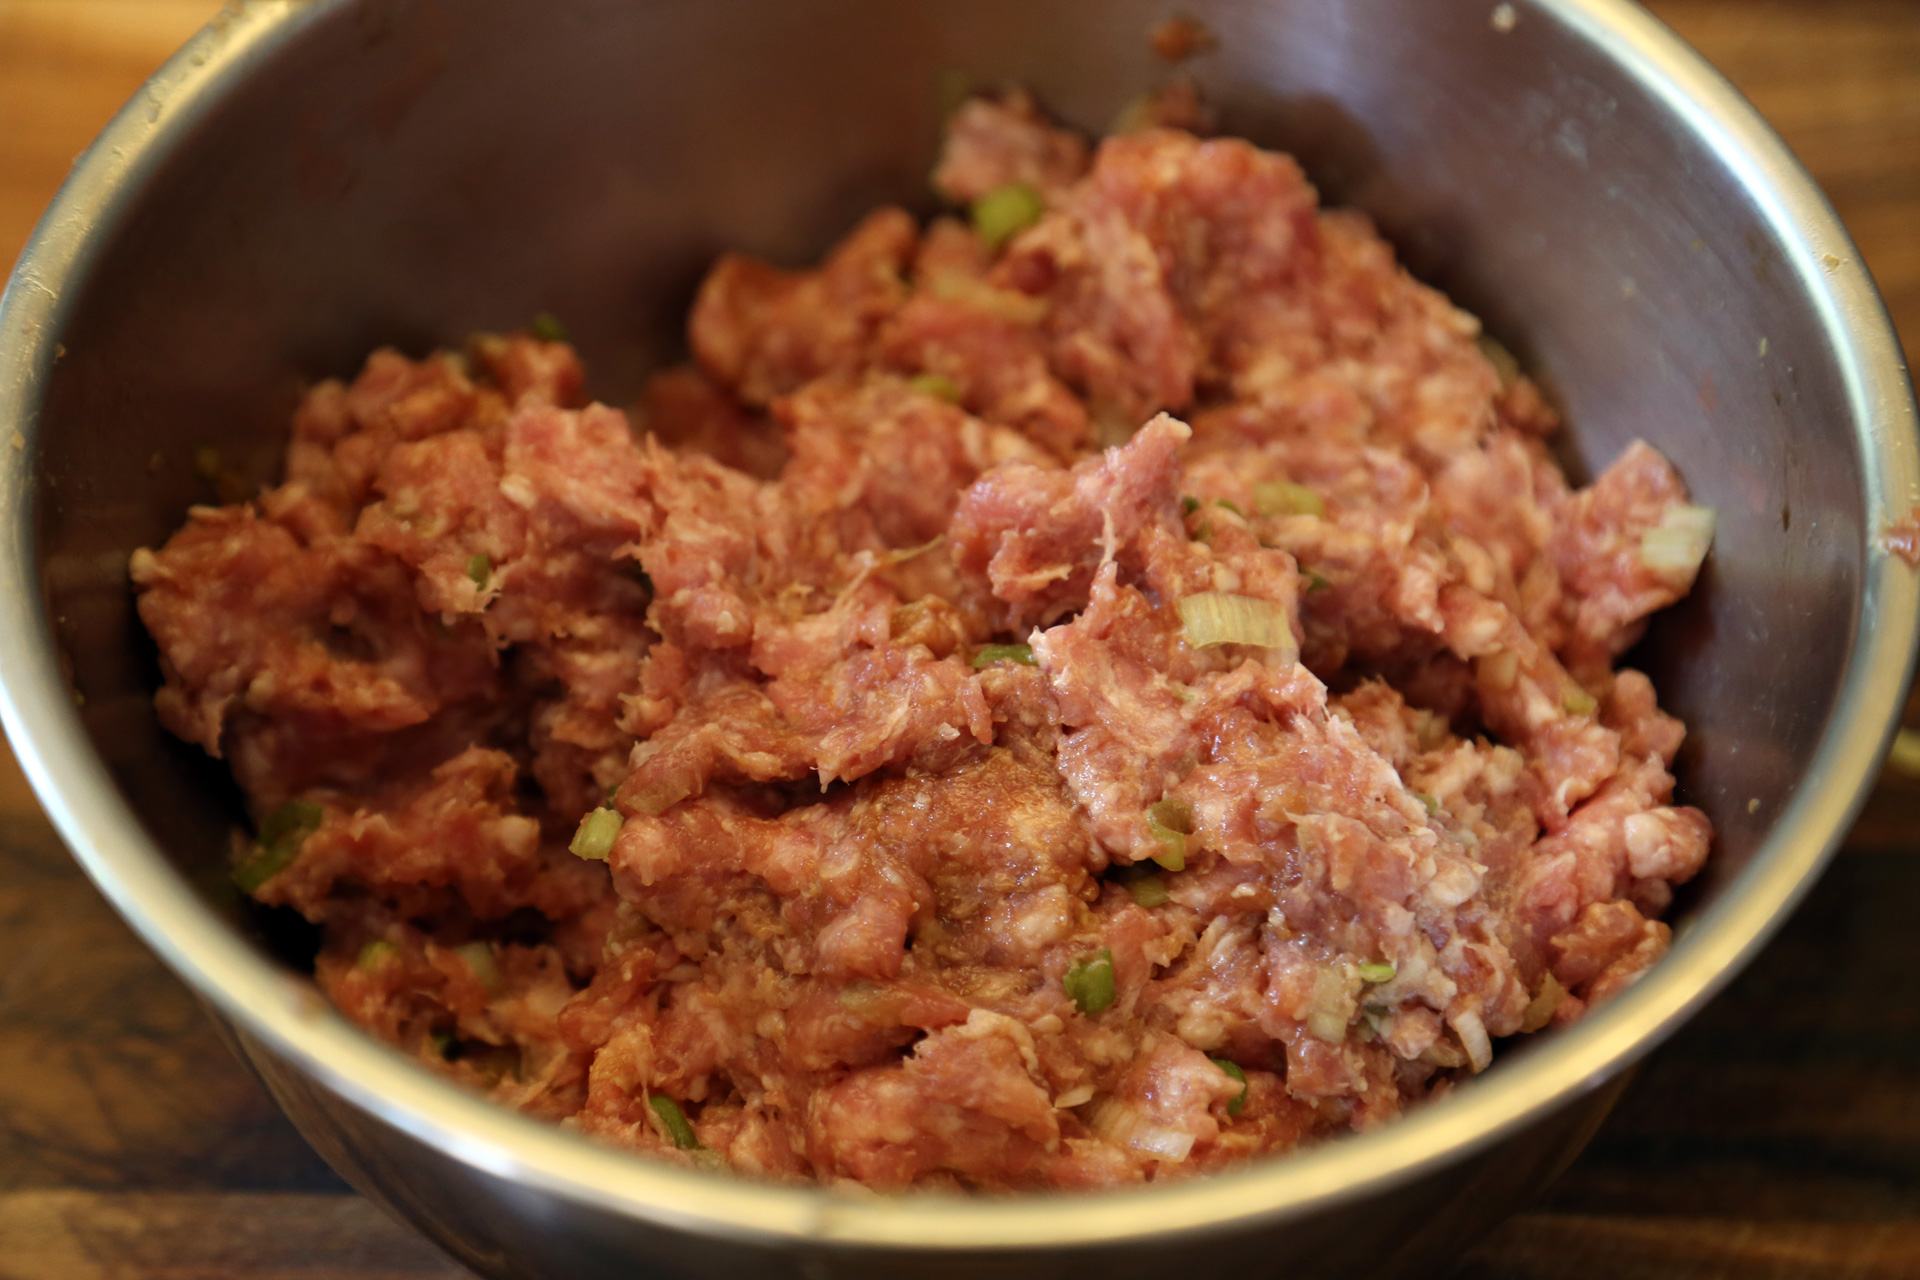 Add the pork and gently mix with your hands to combine.